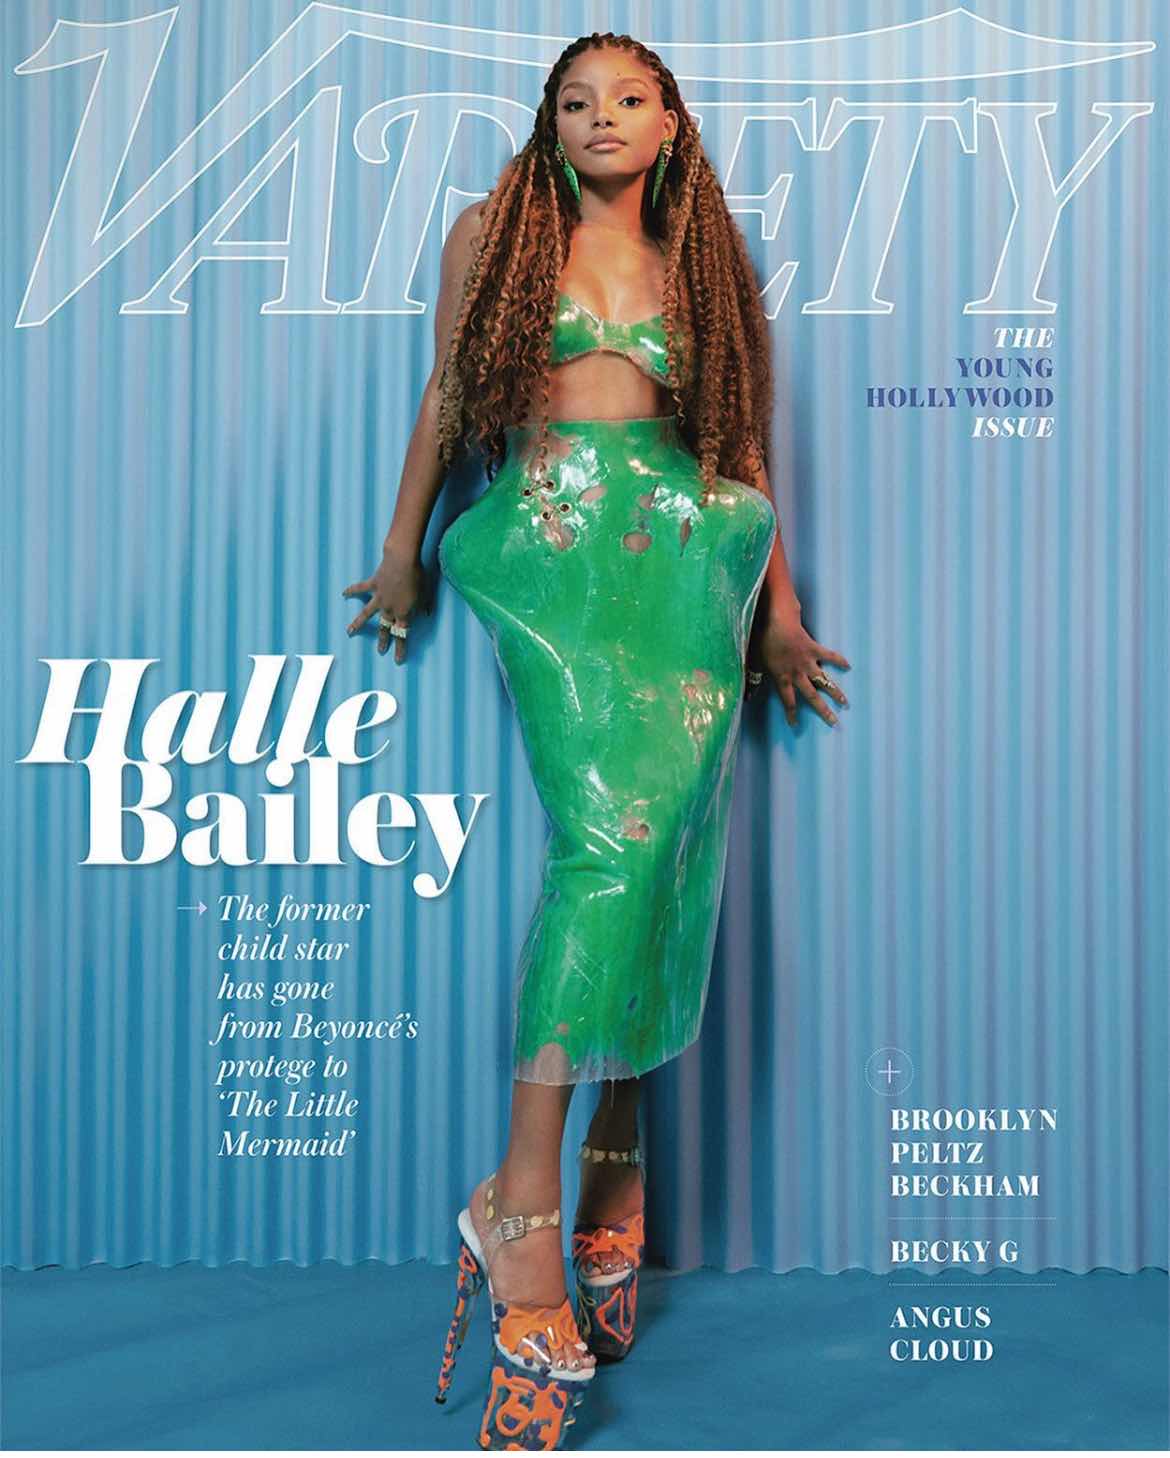 The New Little Mermaid: How Halle Bailey Found Her Voice and Defied Haters by Creating Her Own Ariel